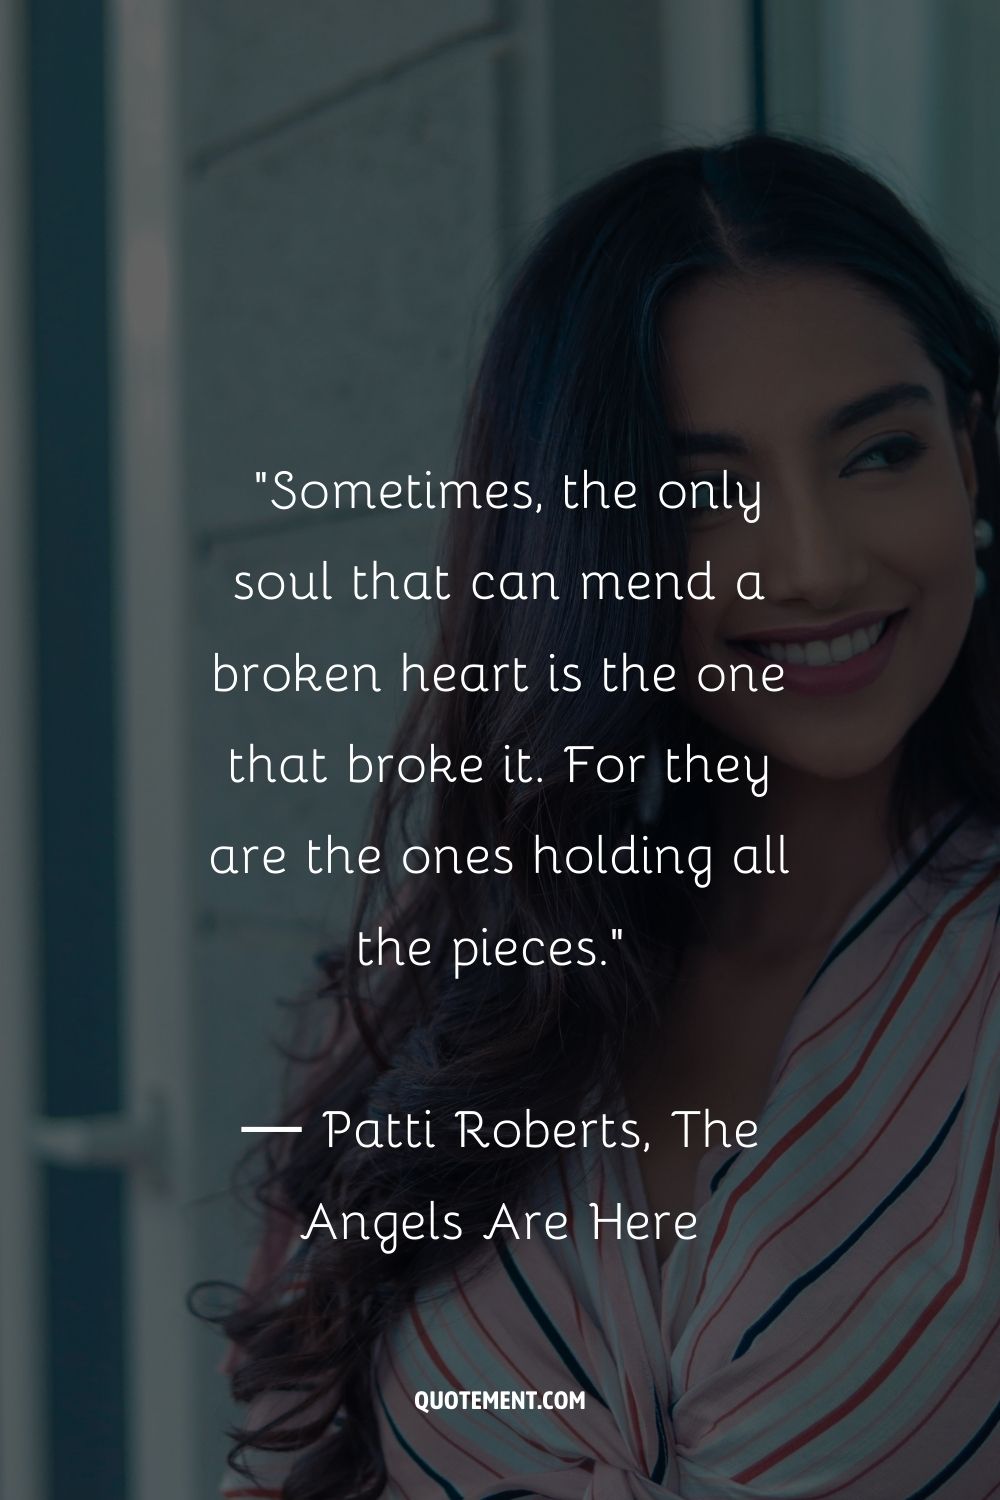 Sometimes, the only soul that can mend a broken heart is the one that broke it. For they are the ones holding all the pieces